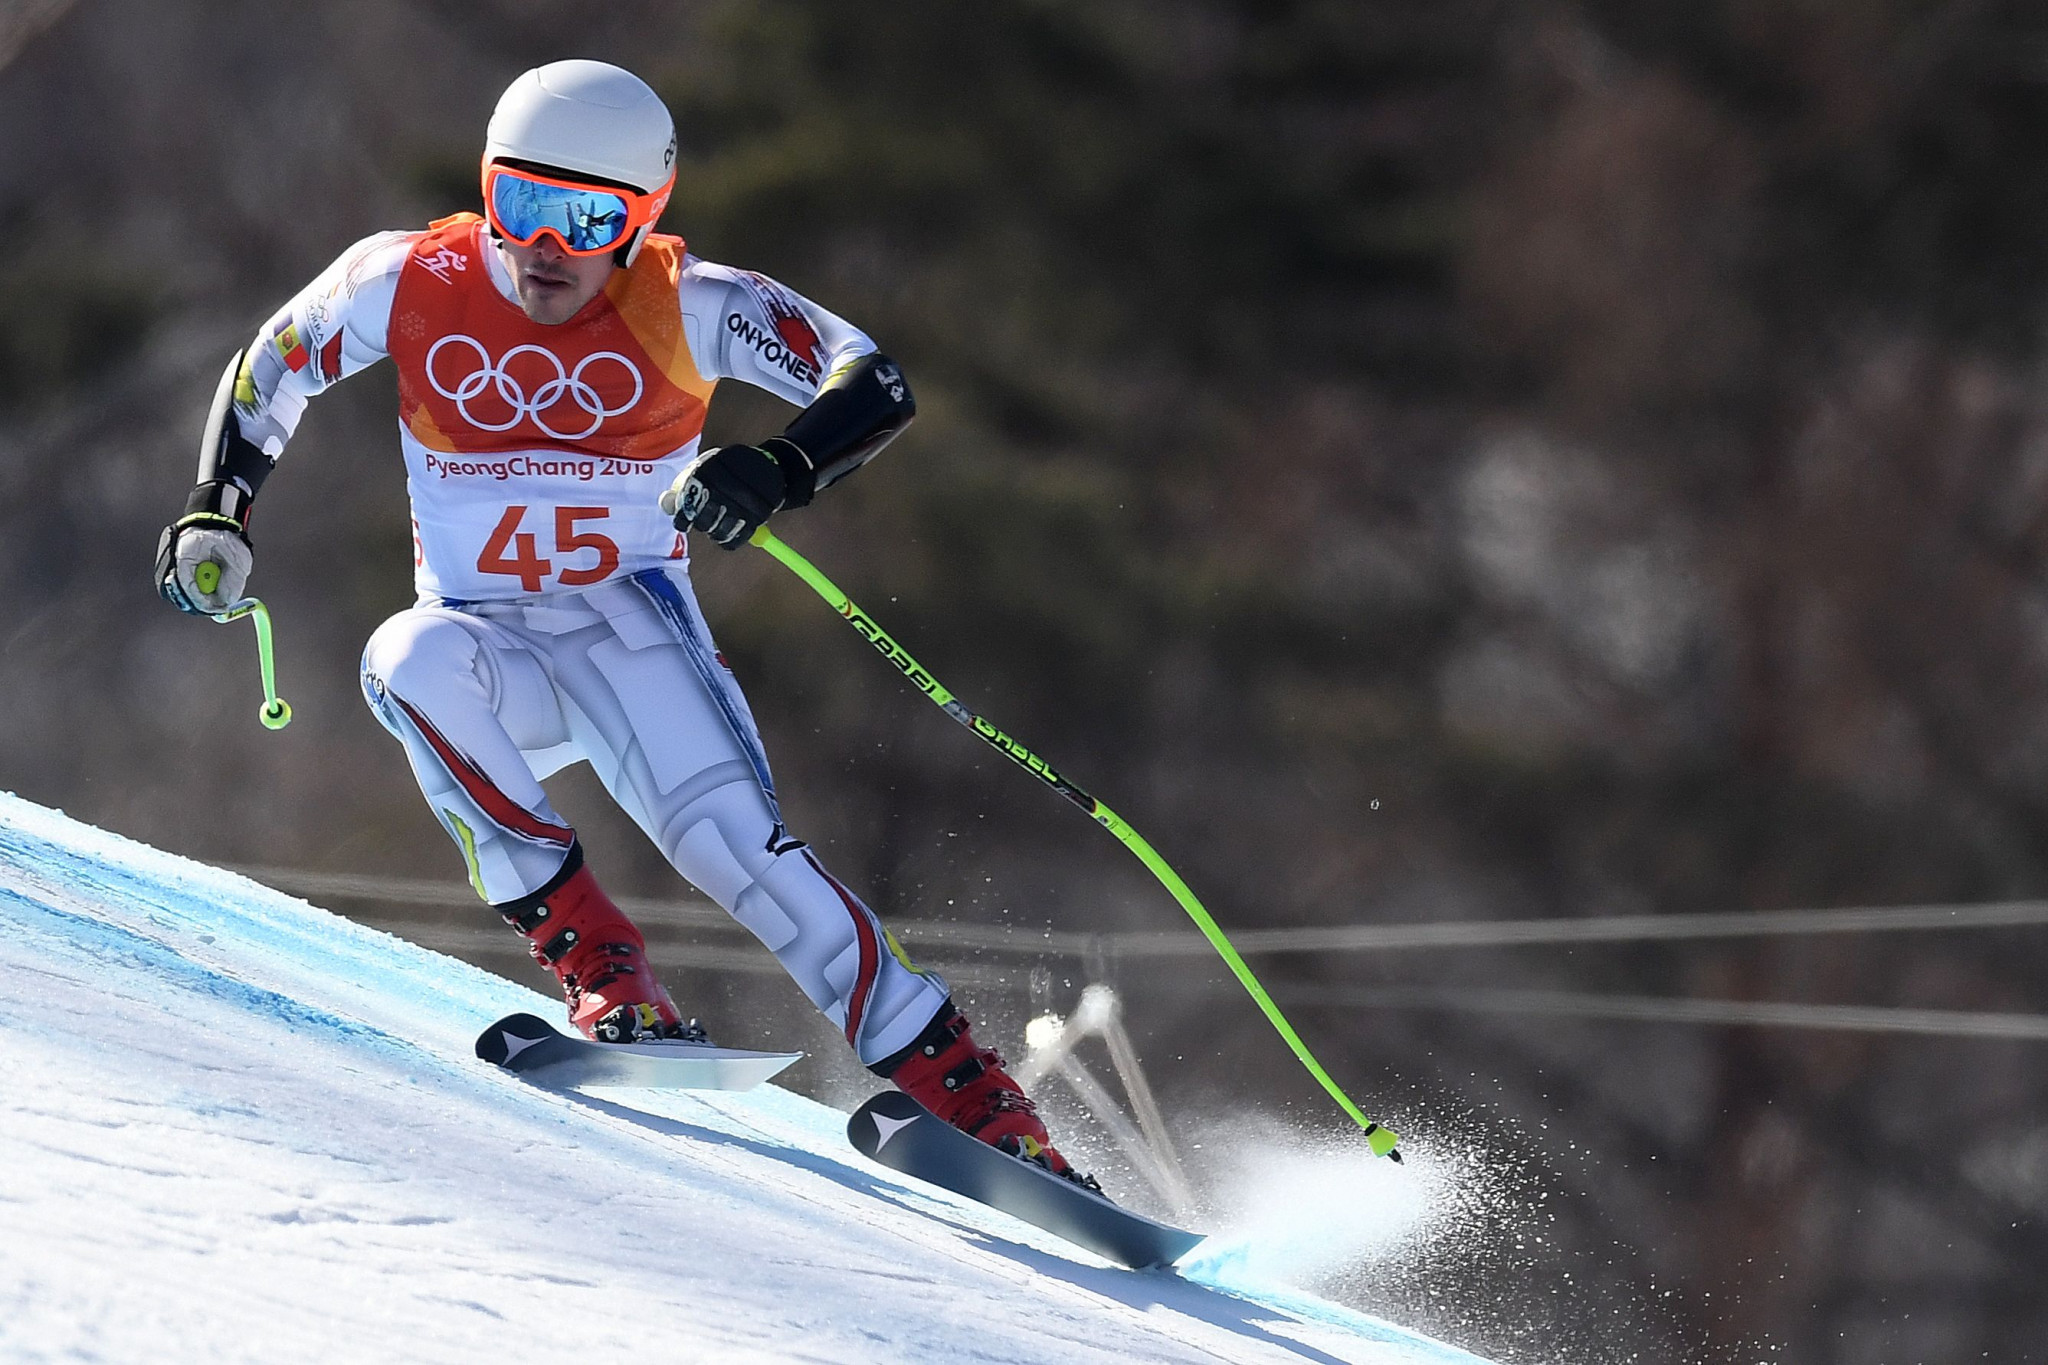 Andorra's Marc Oliveras competes at Pyeongchang 2018 ©Getty Images